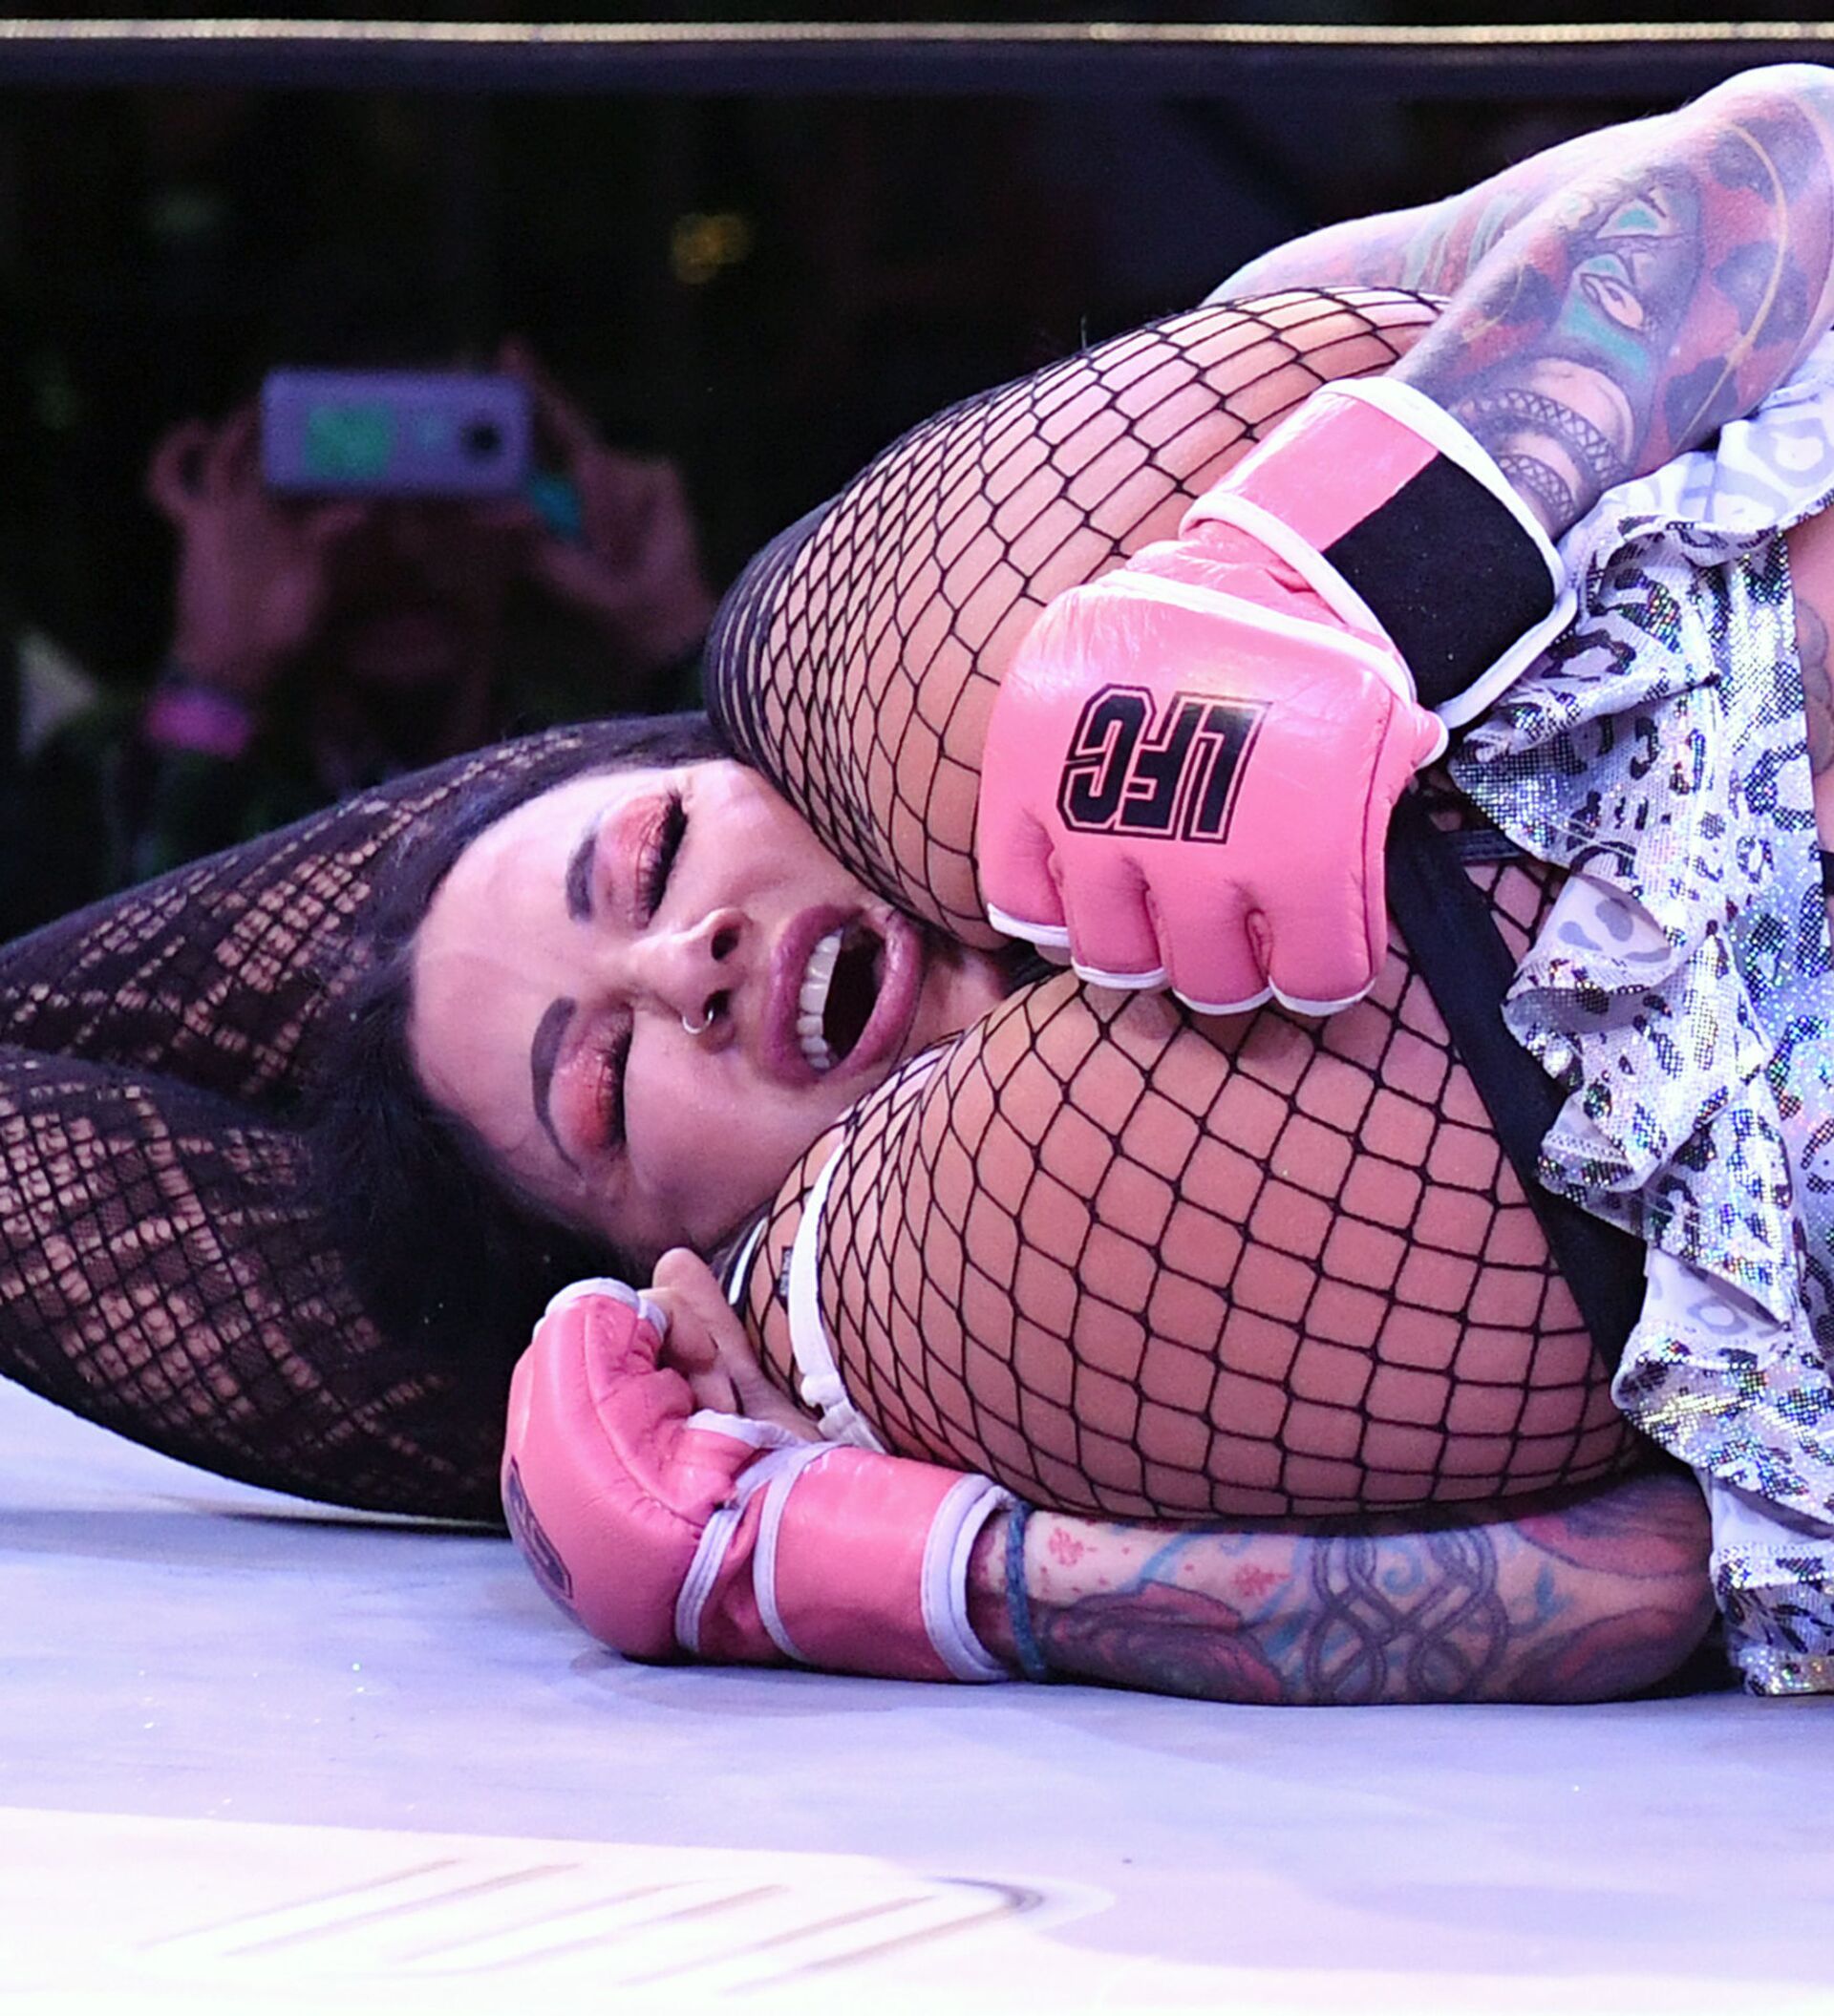 Sexy, Nerdy, Inked & Curvy: Lingerie Fighting Championships in the